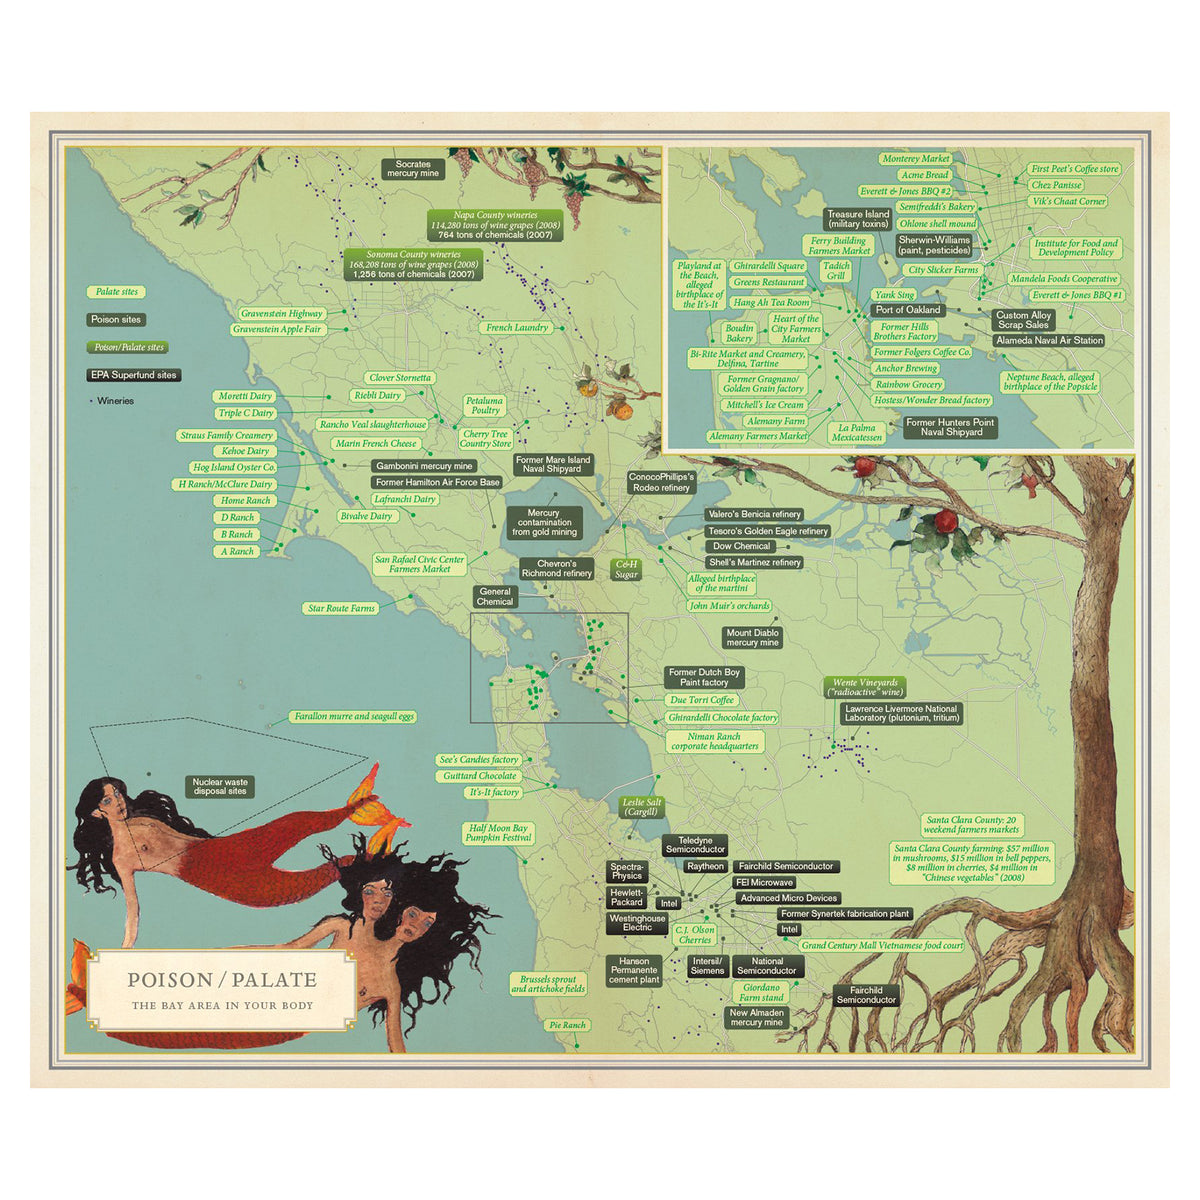 Infinite City: A San Francisco Atlas greater Bay Area map page.